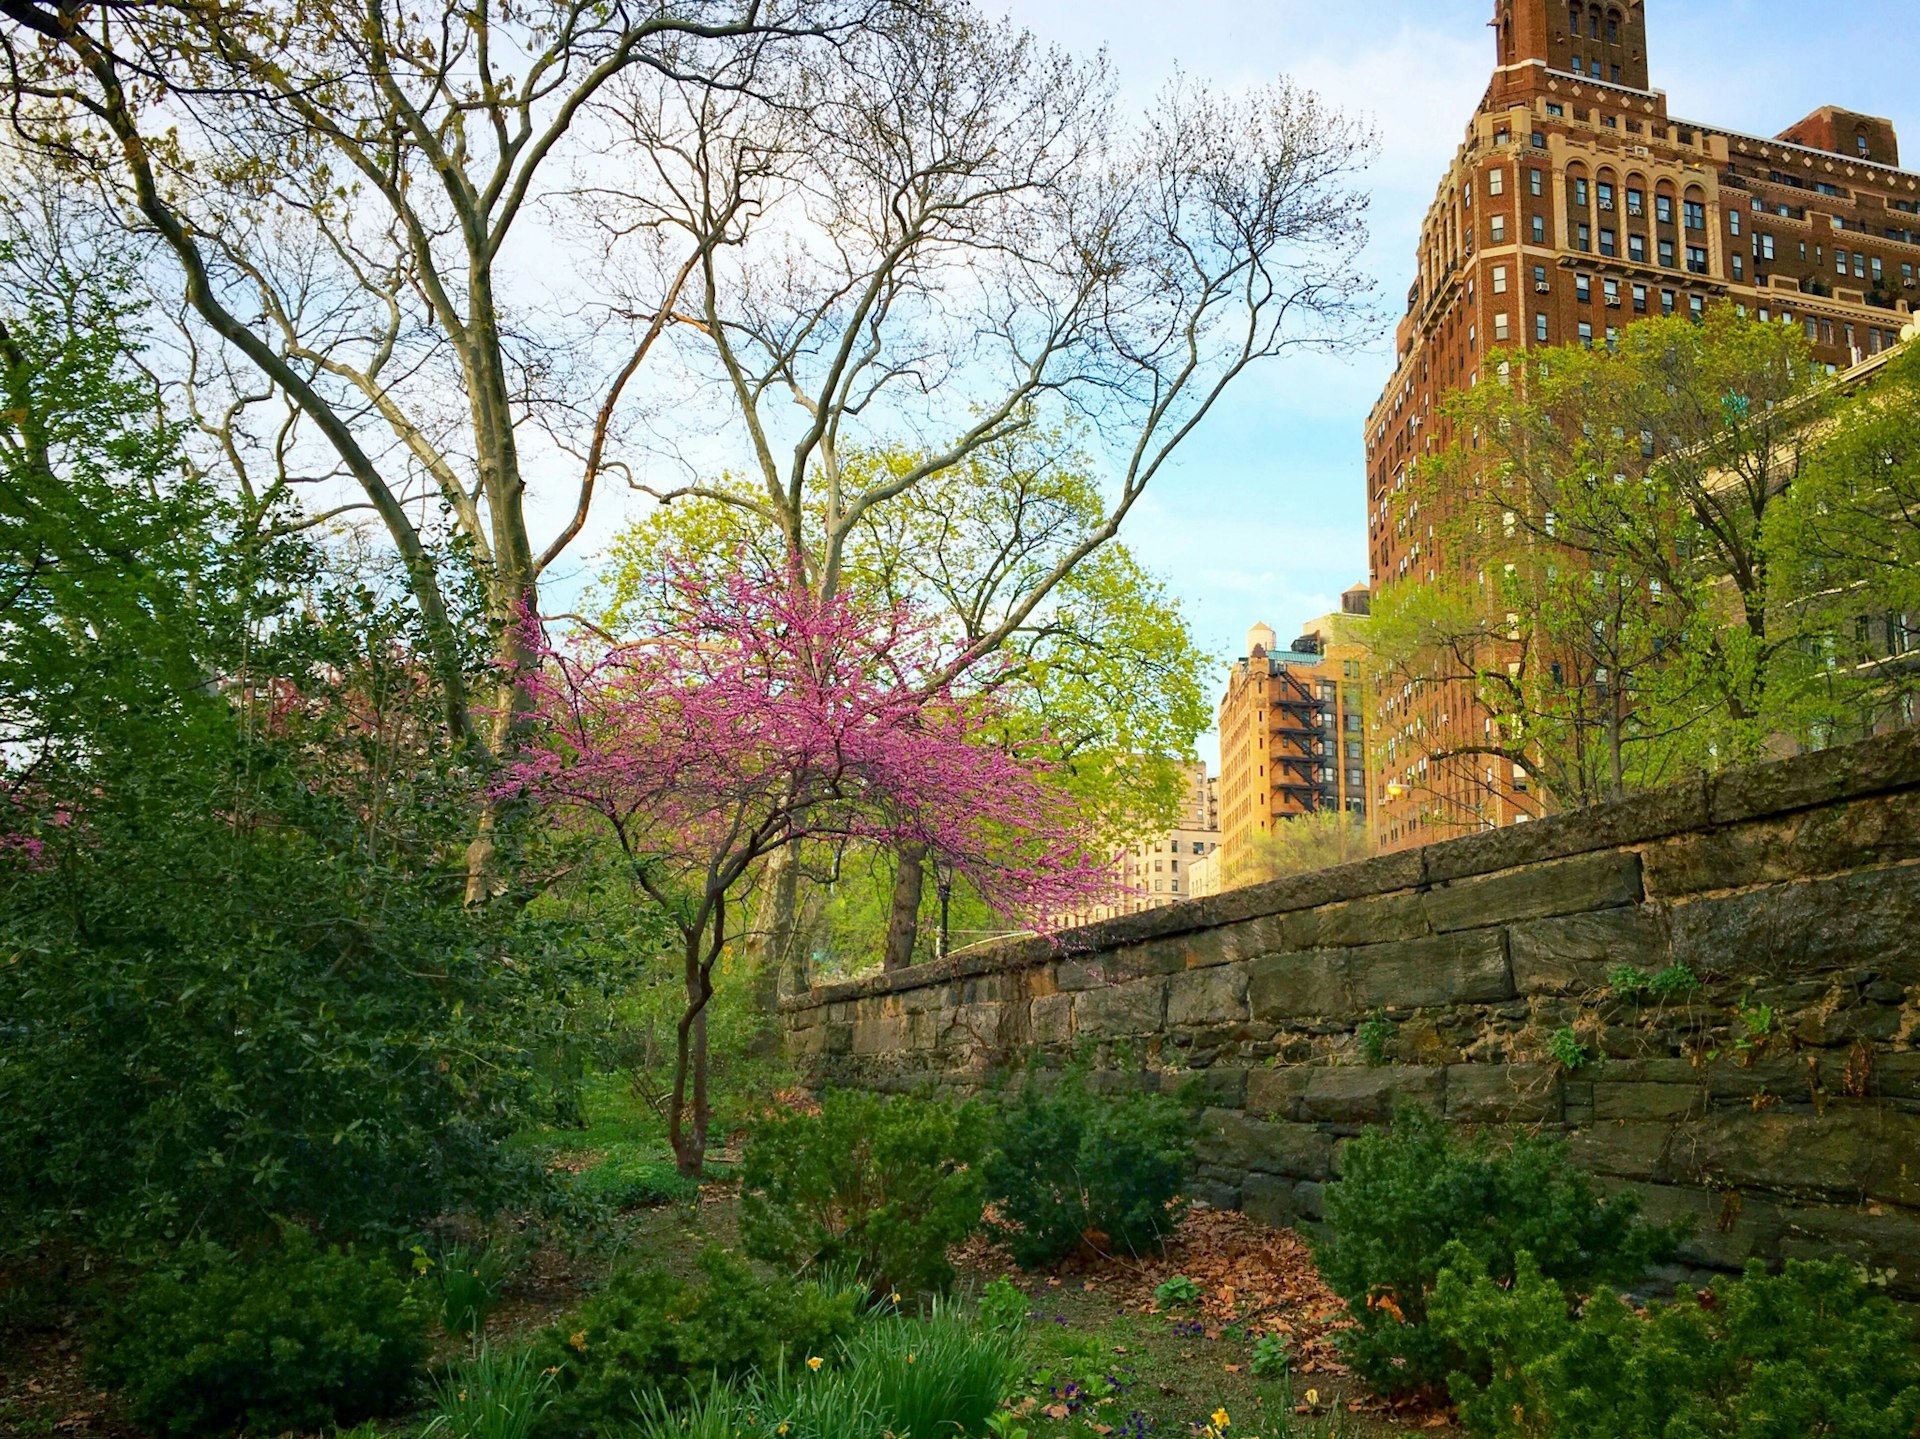 A blooming tree in New York City's Riverside Park during springtime